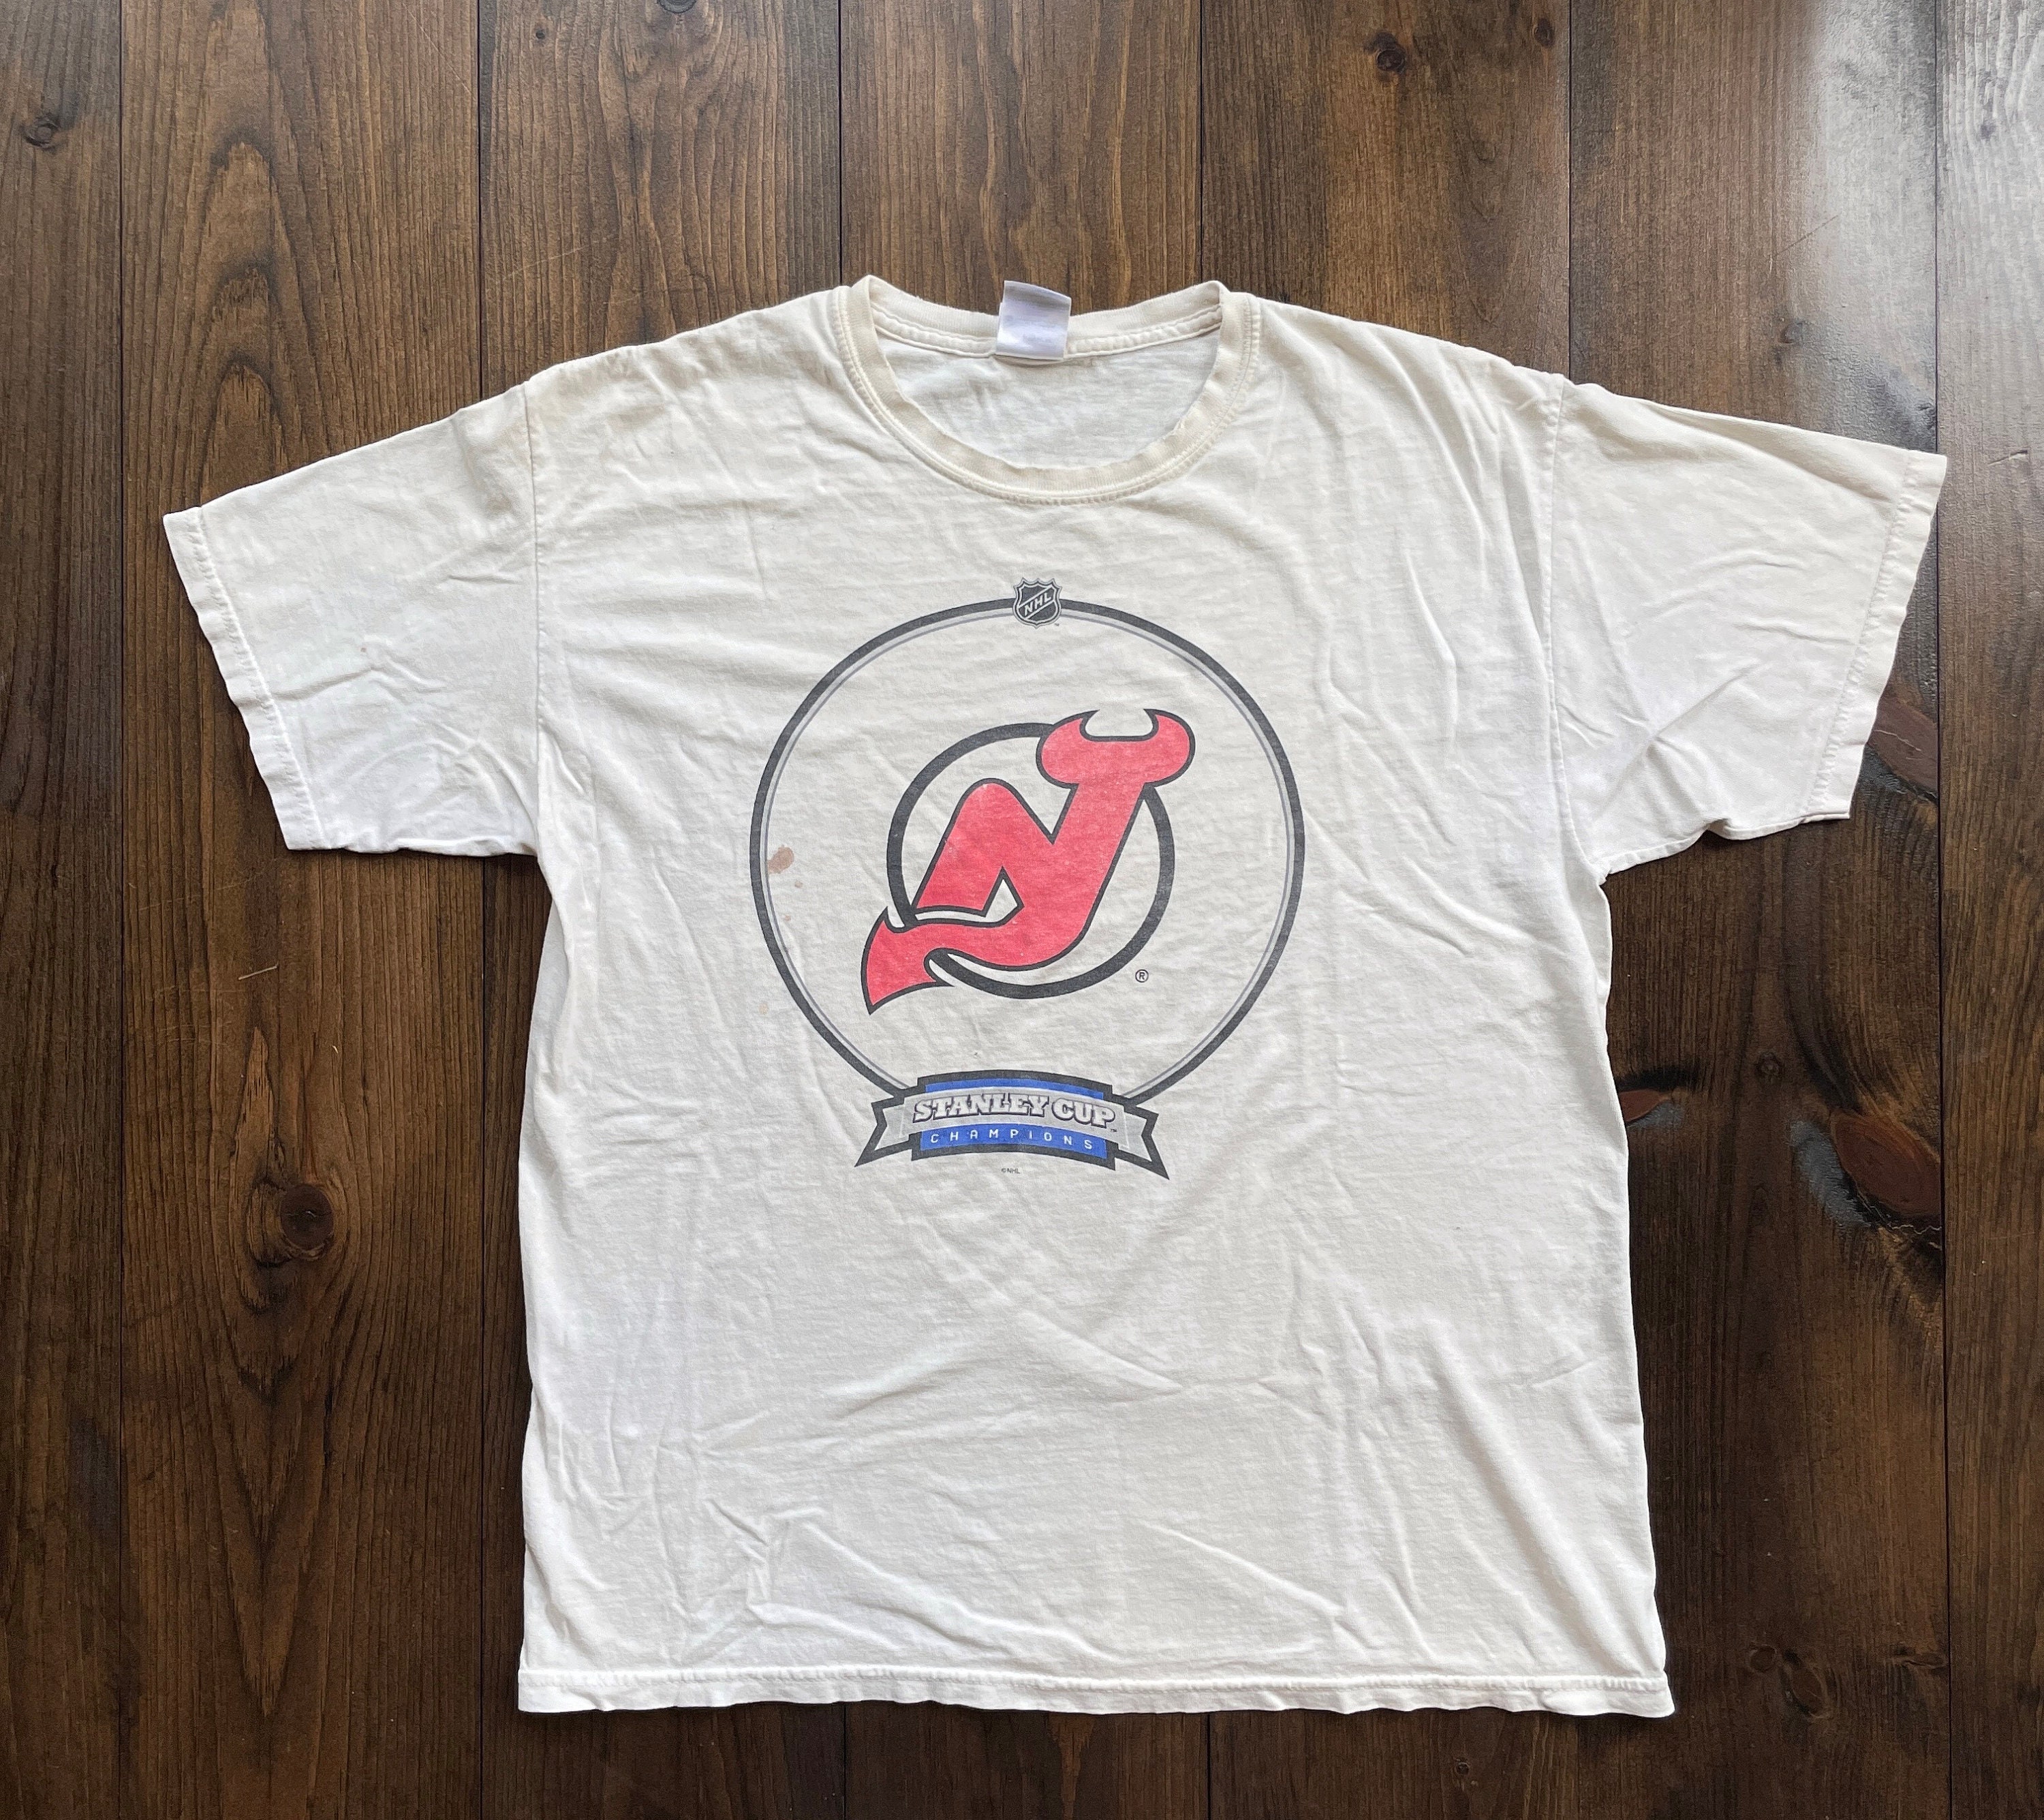 Vintage New Jersey Devils 2012 Eastern Conference Champions Shirt